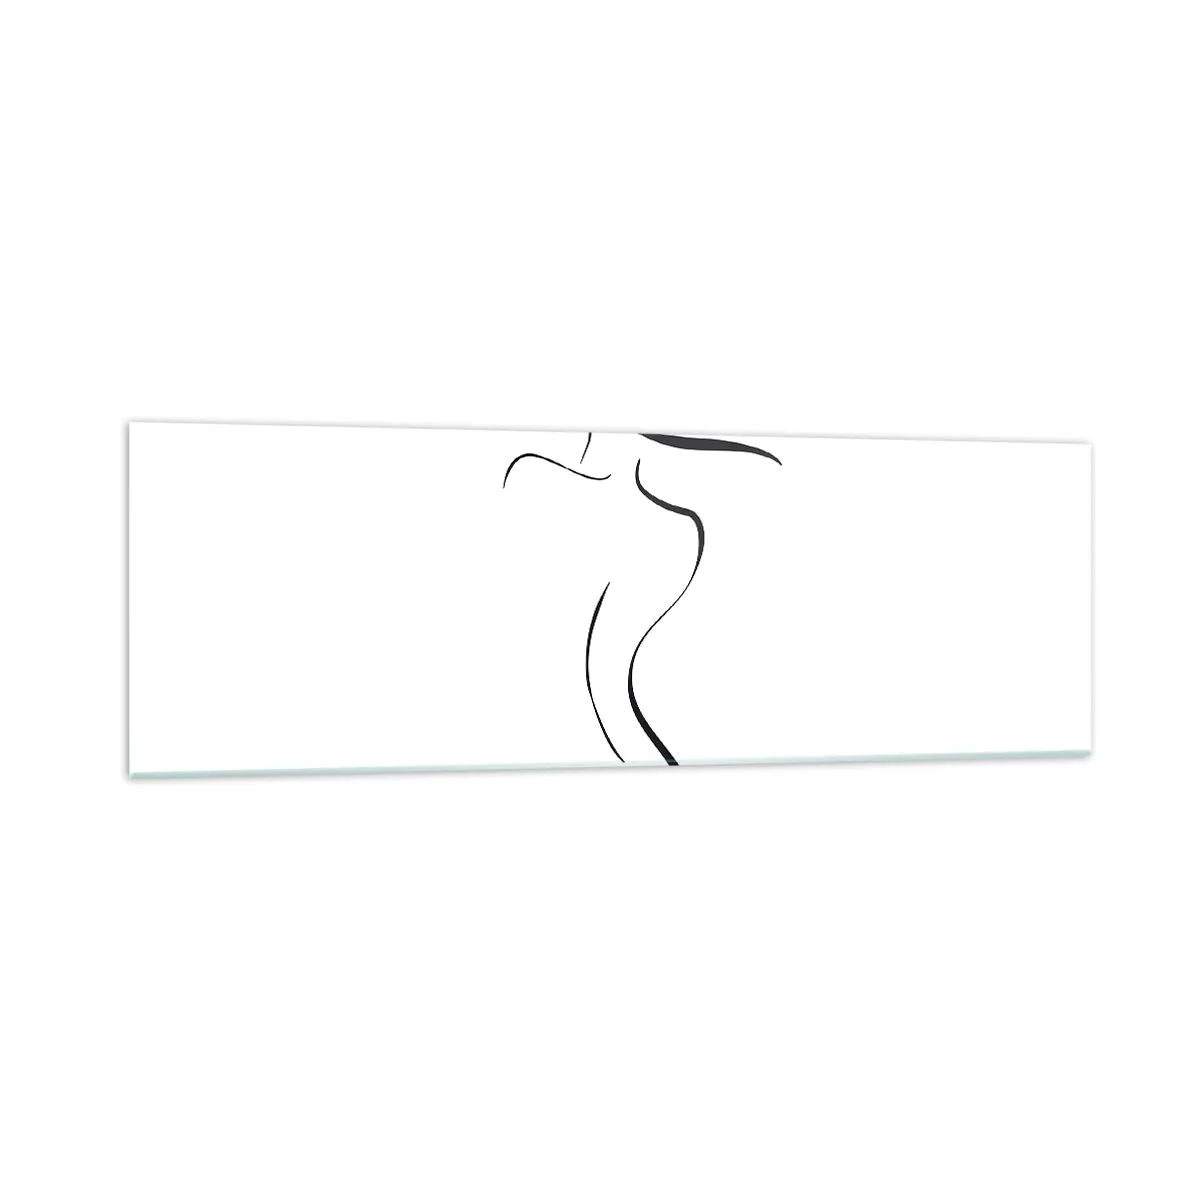 Glass picture  Arttor 160x50 cm - Elusive Like a Wave - Abstraction, Woman'S Body, Woman With Hat, Graphics, Lineart, For living-room, For bedroom, White, Black, Horizontal, Glass, GAB160x50-4908